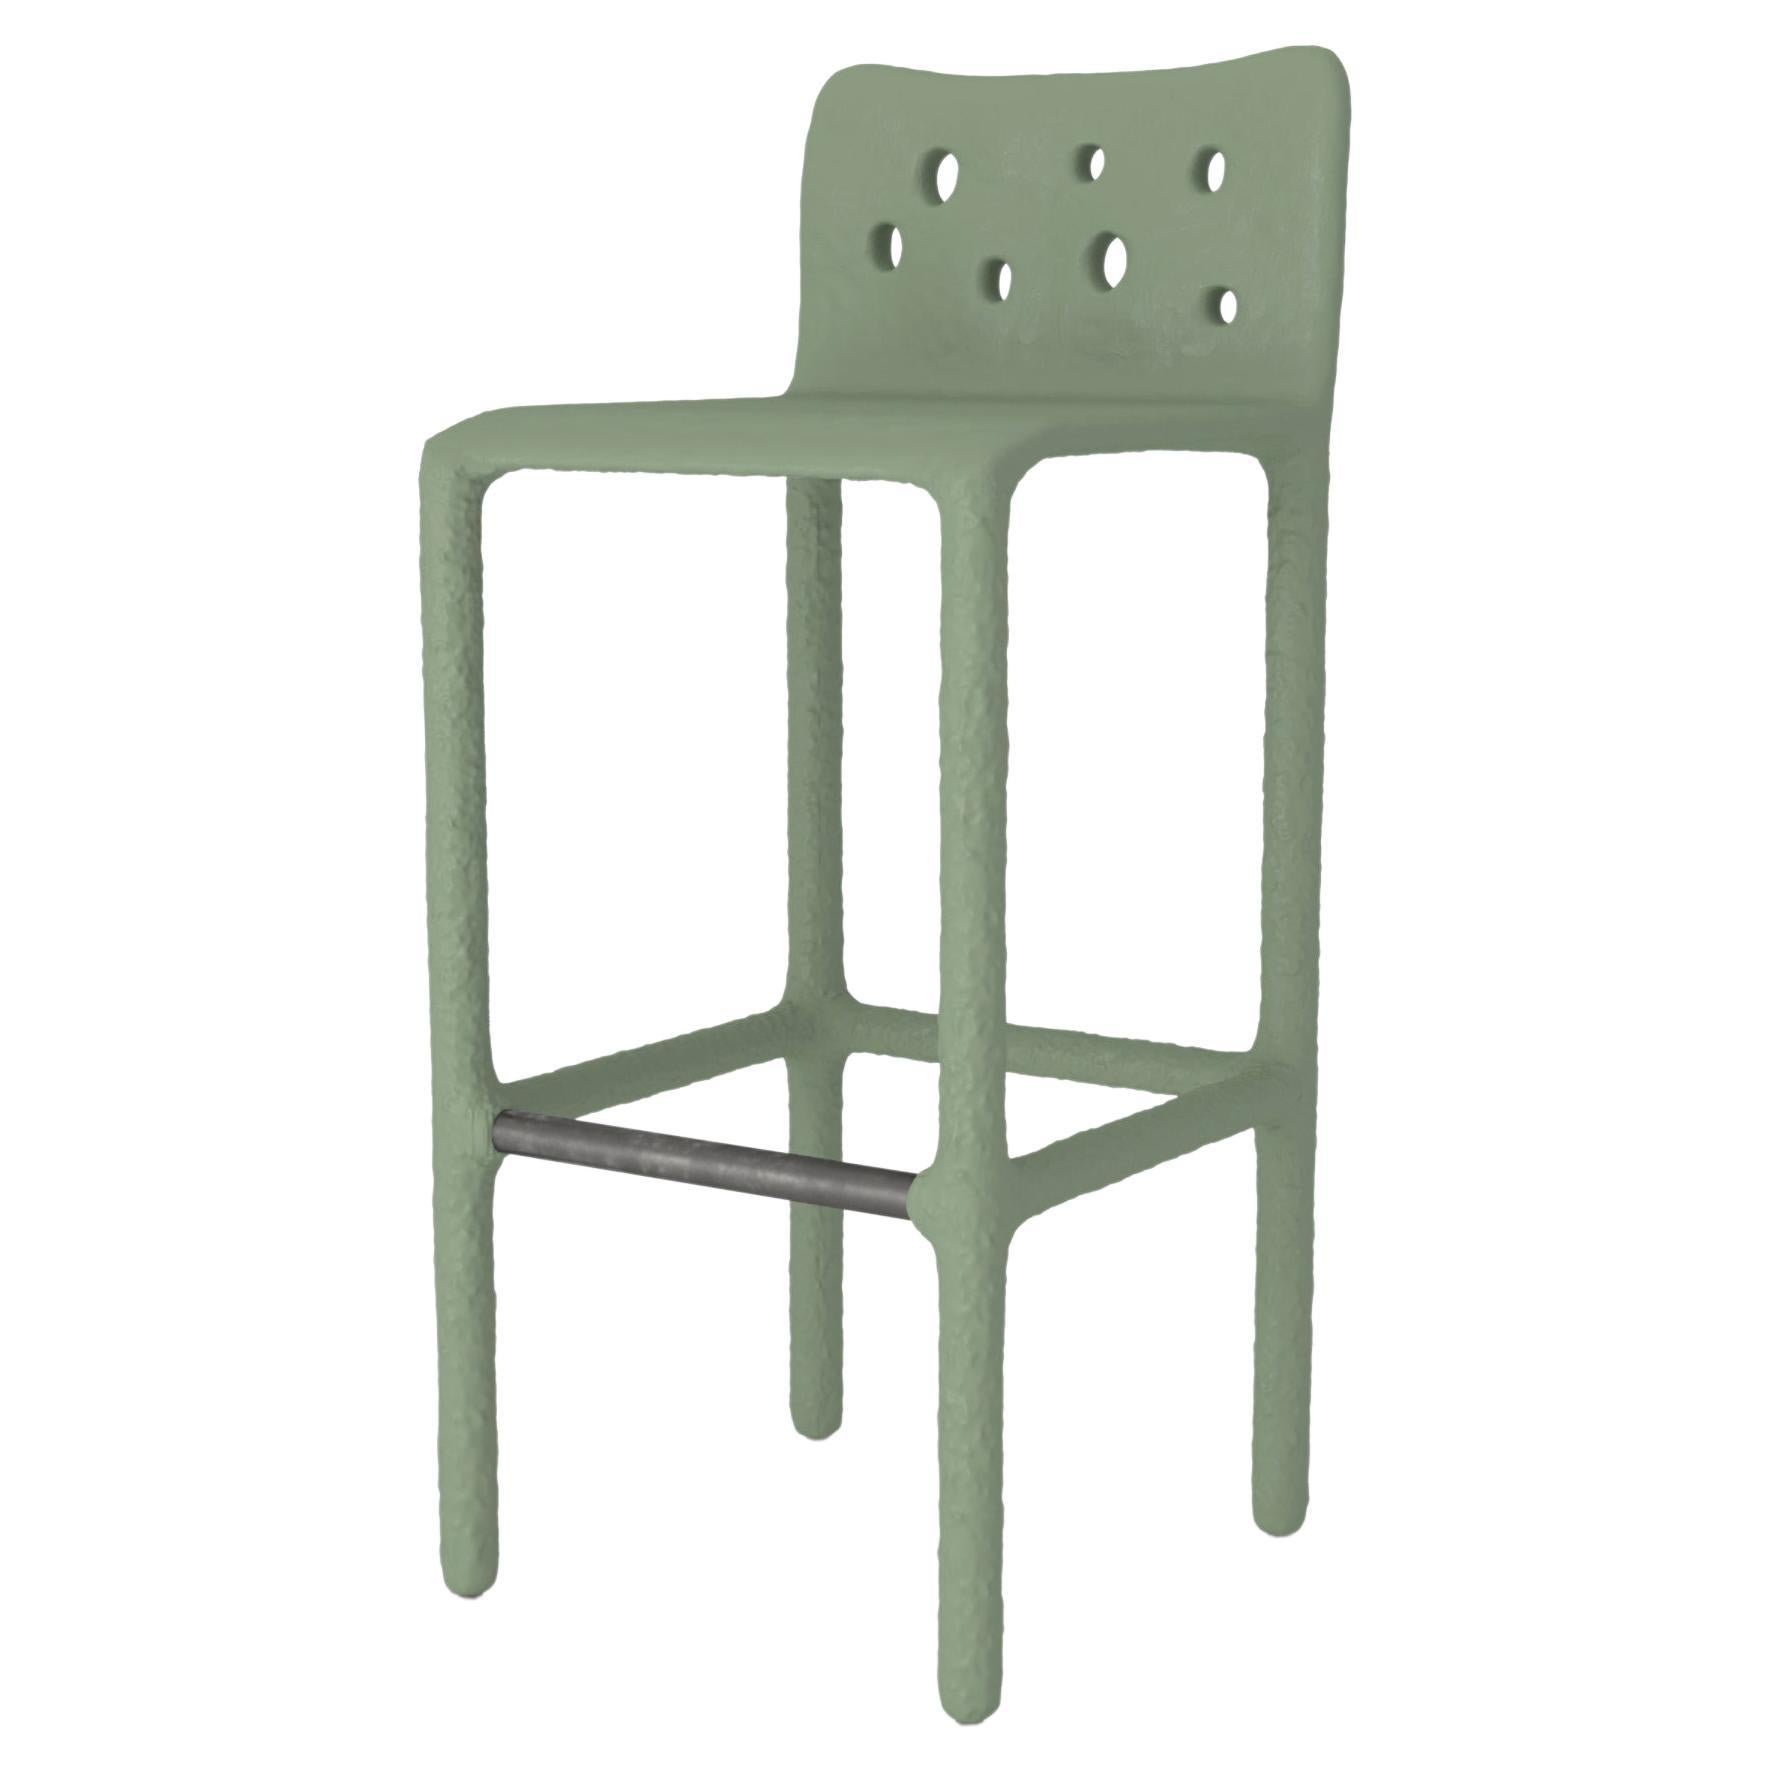 Green Sculpted Contemporary Chair by Faina For Sale